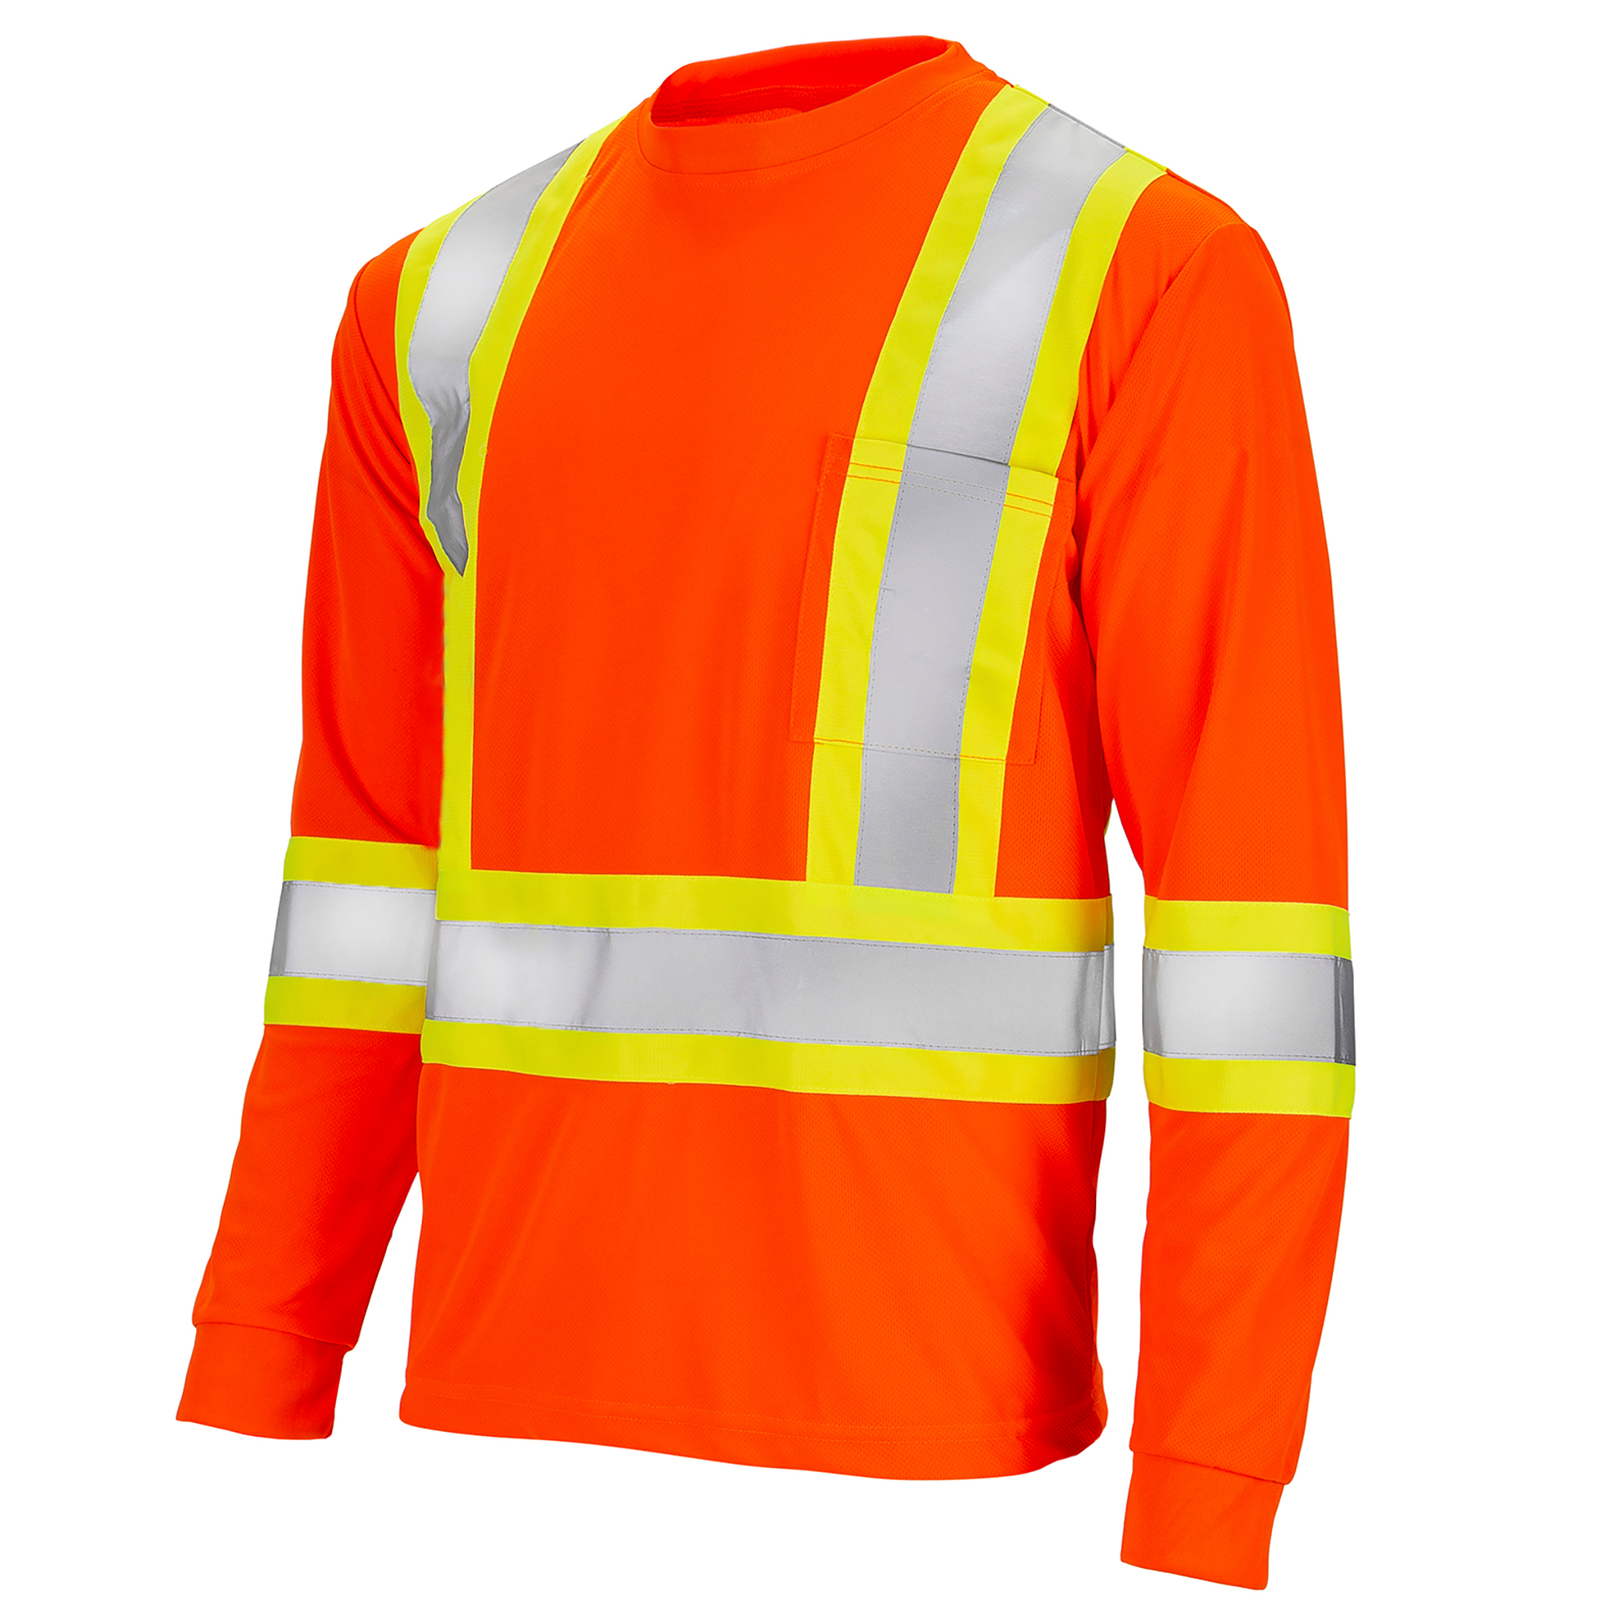 Diagonal view of the JORESTECH Hi-vis reflective two tone long sleeve safety orange and yellow pocket shirt